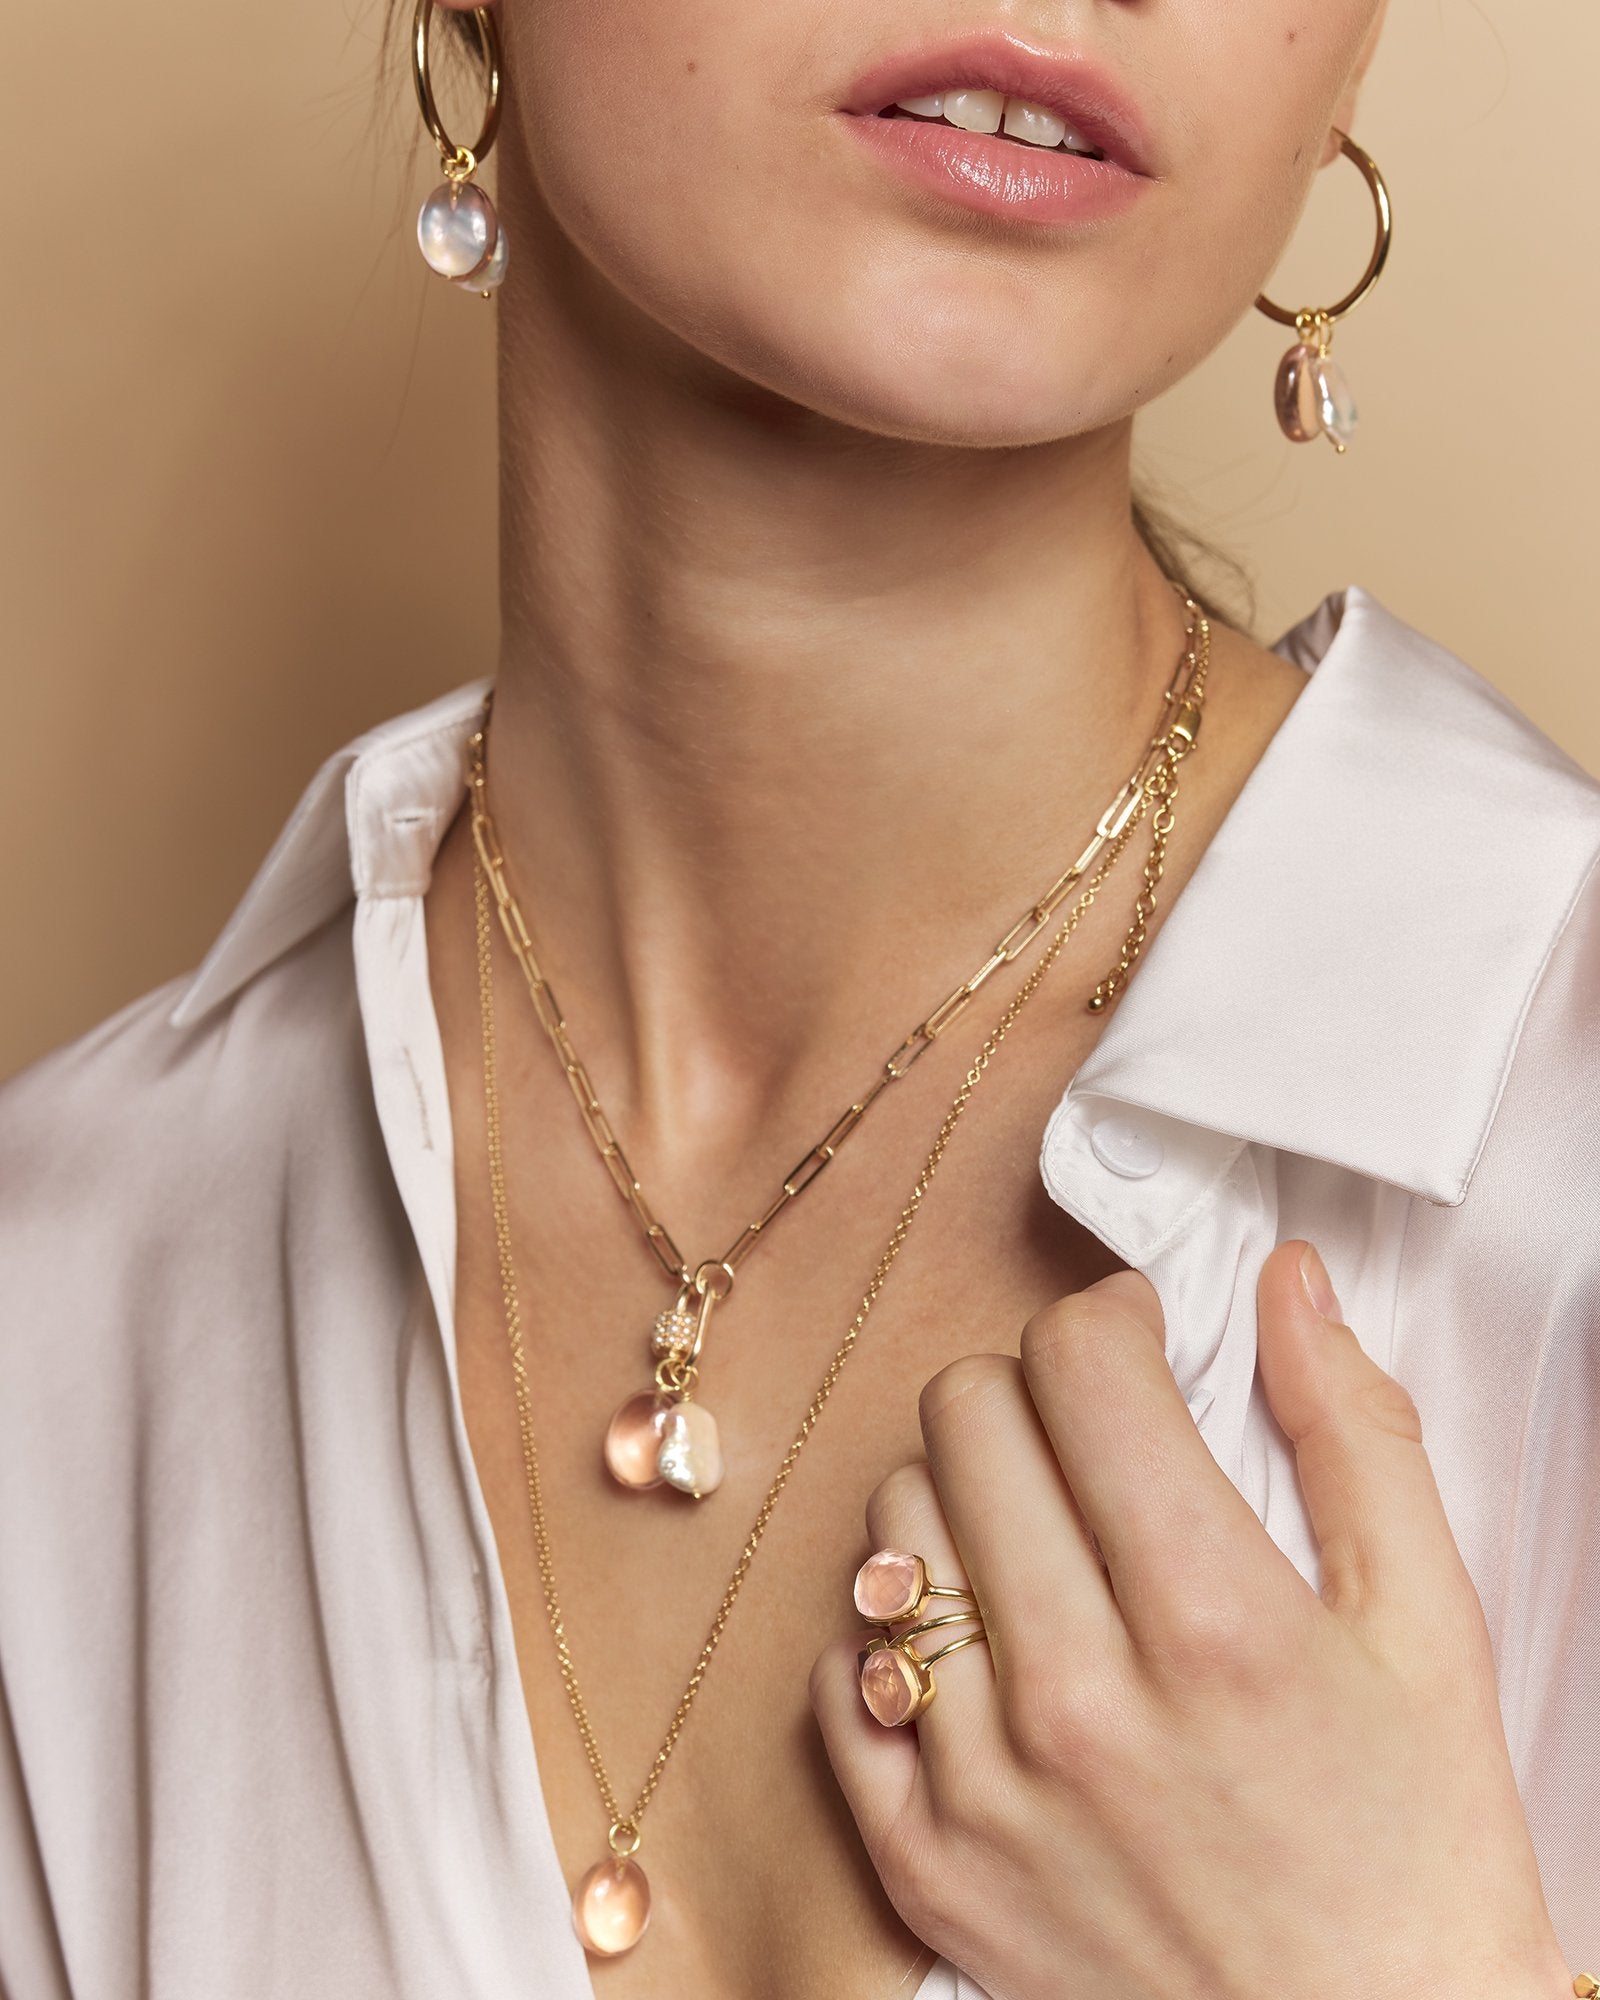 Our vermeil jewellery is handmade with recycled and purified sterling silver heavily electroplated with several layers of solid Fair Trade gold.